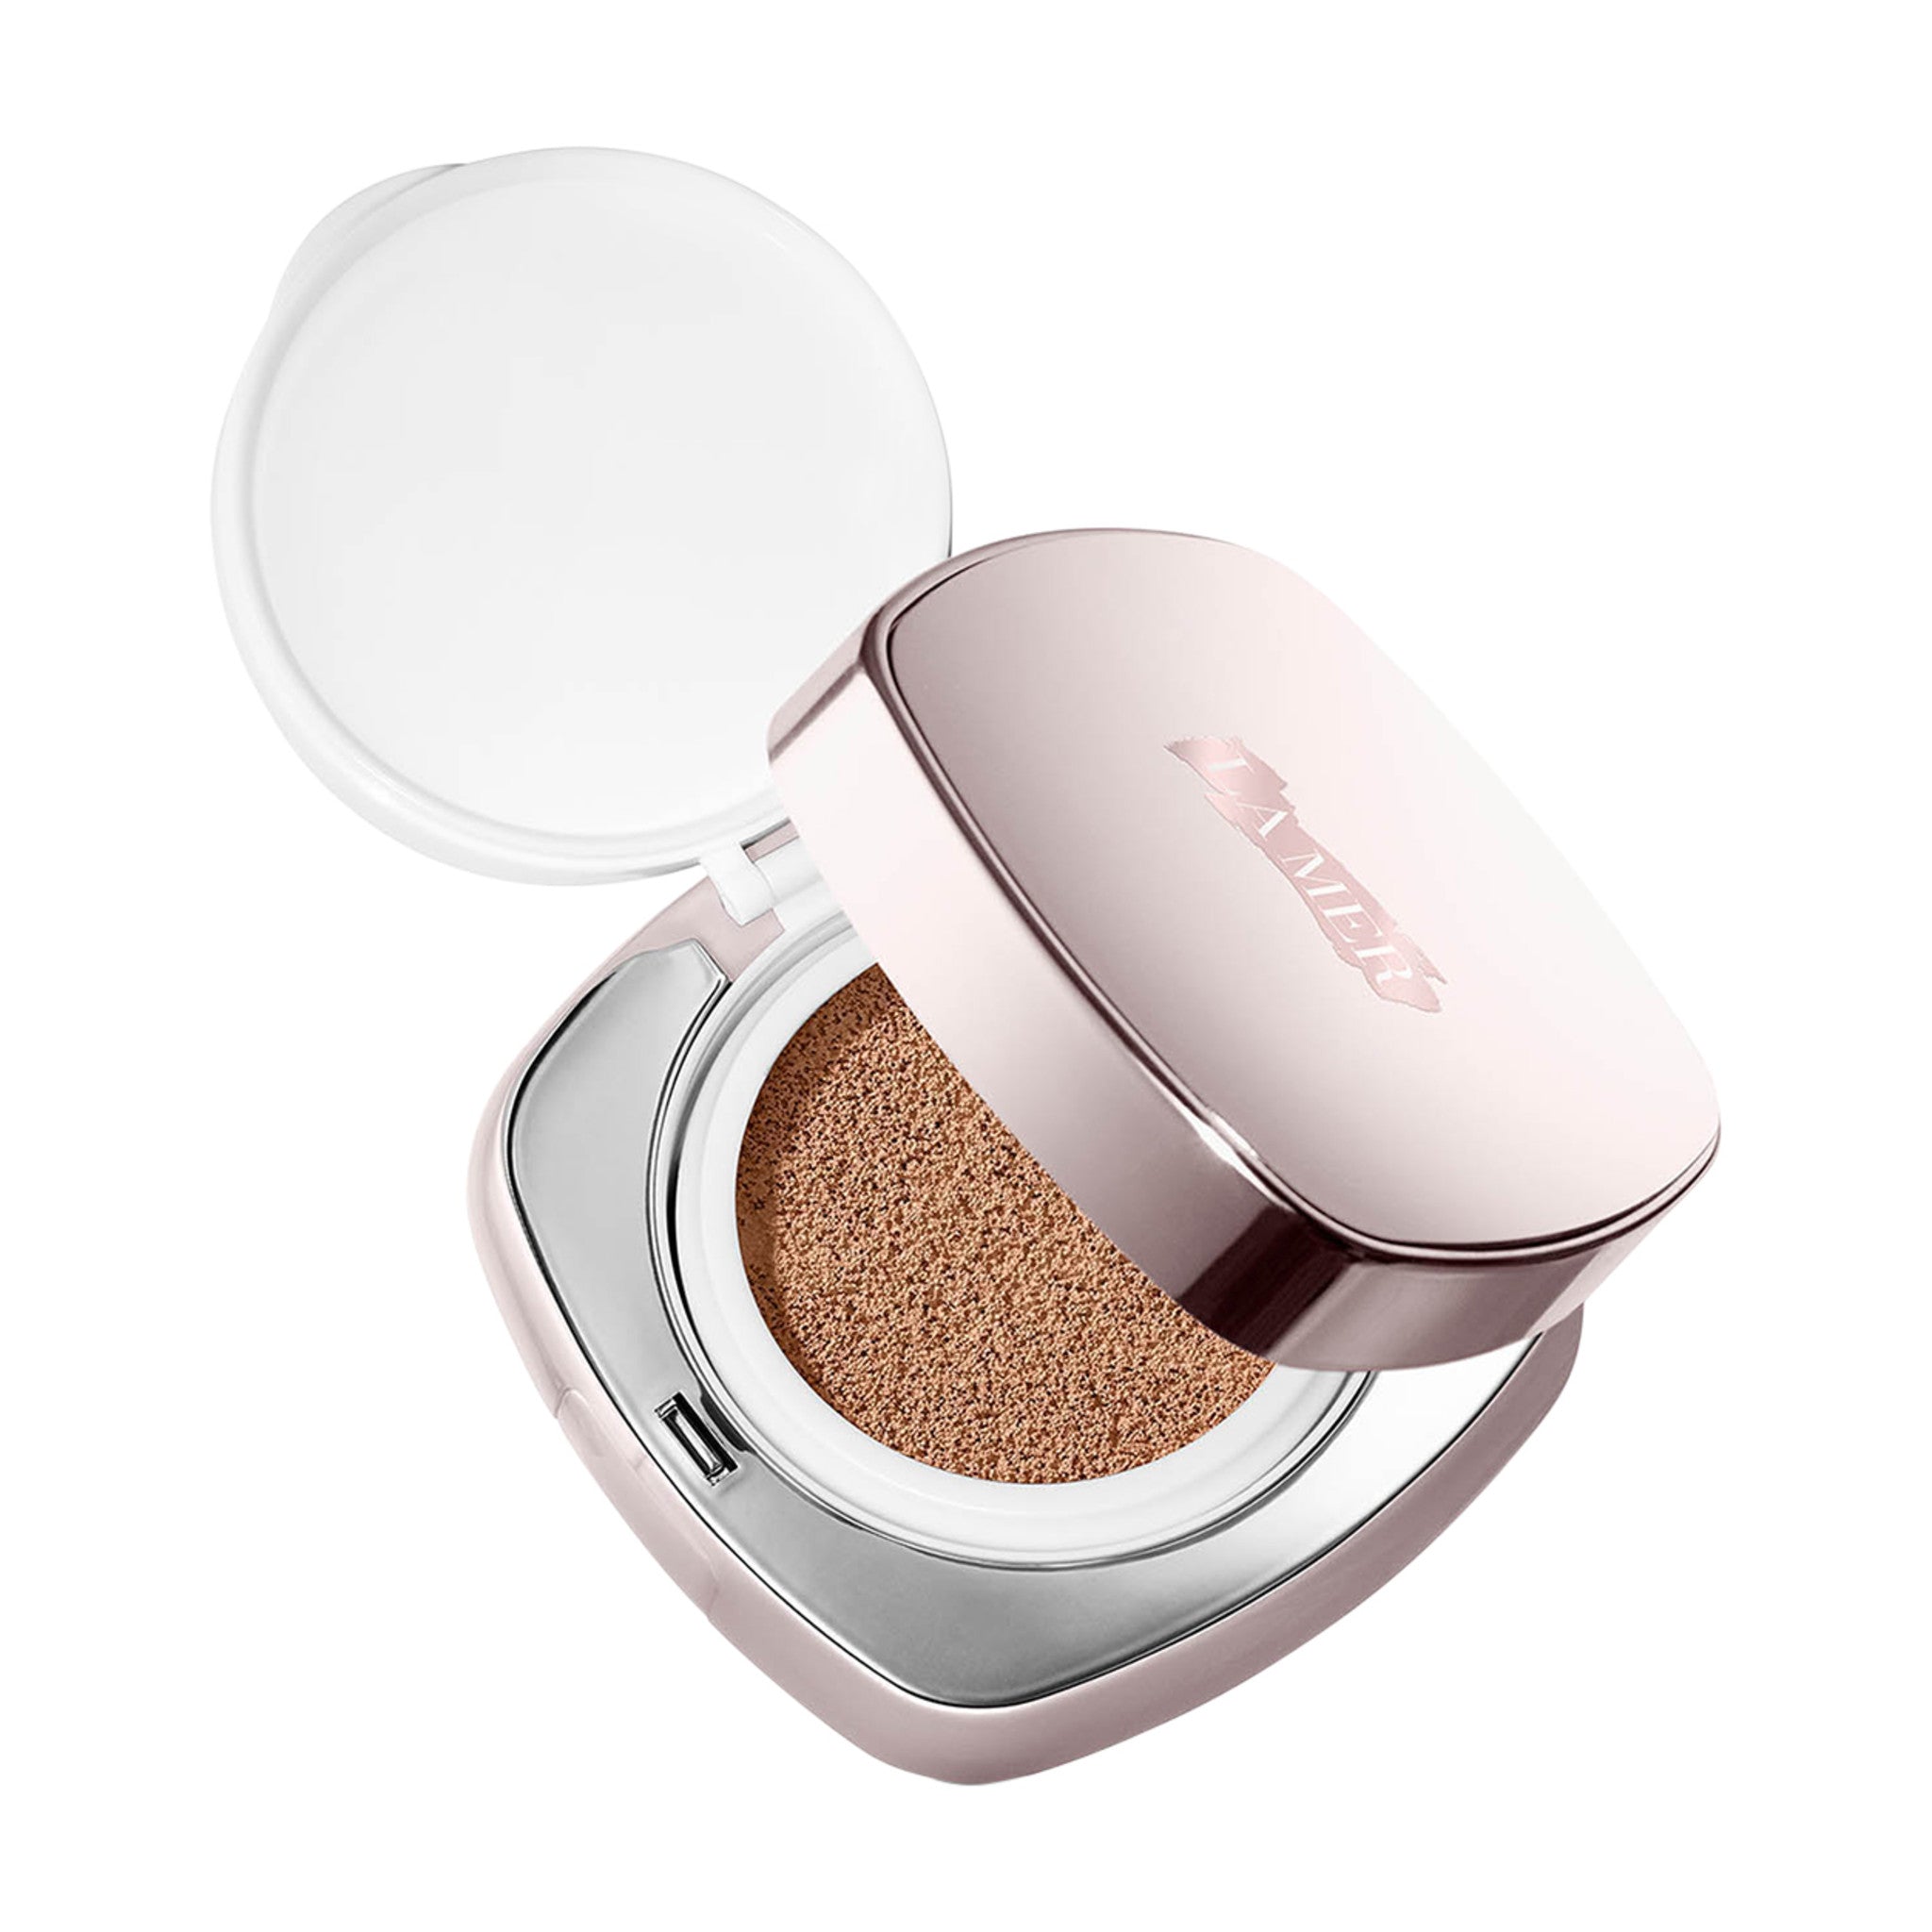 La Mer The Luminous Lifting Cushion Foundation SPF 20 Color/Shade variant: 43 Beige Nude - Medium Skin with Warm Undertone main image. This product is for medium complexions